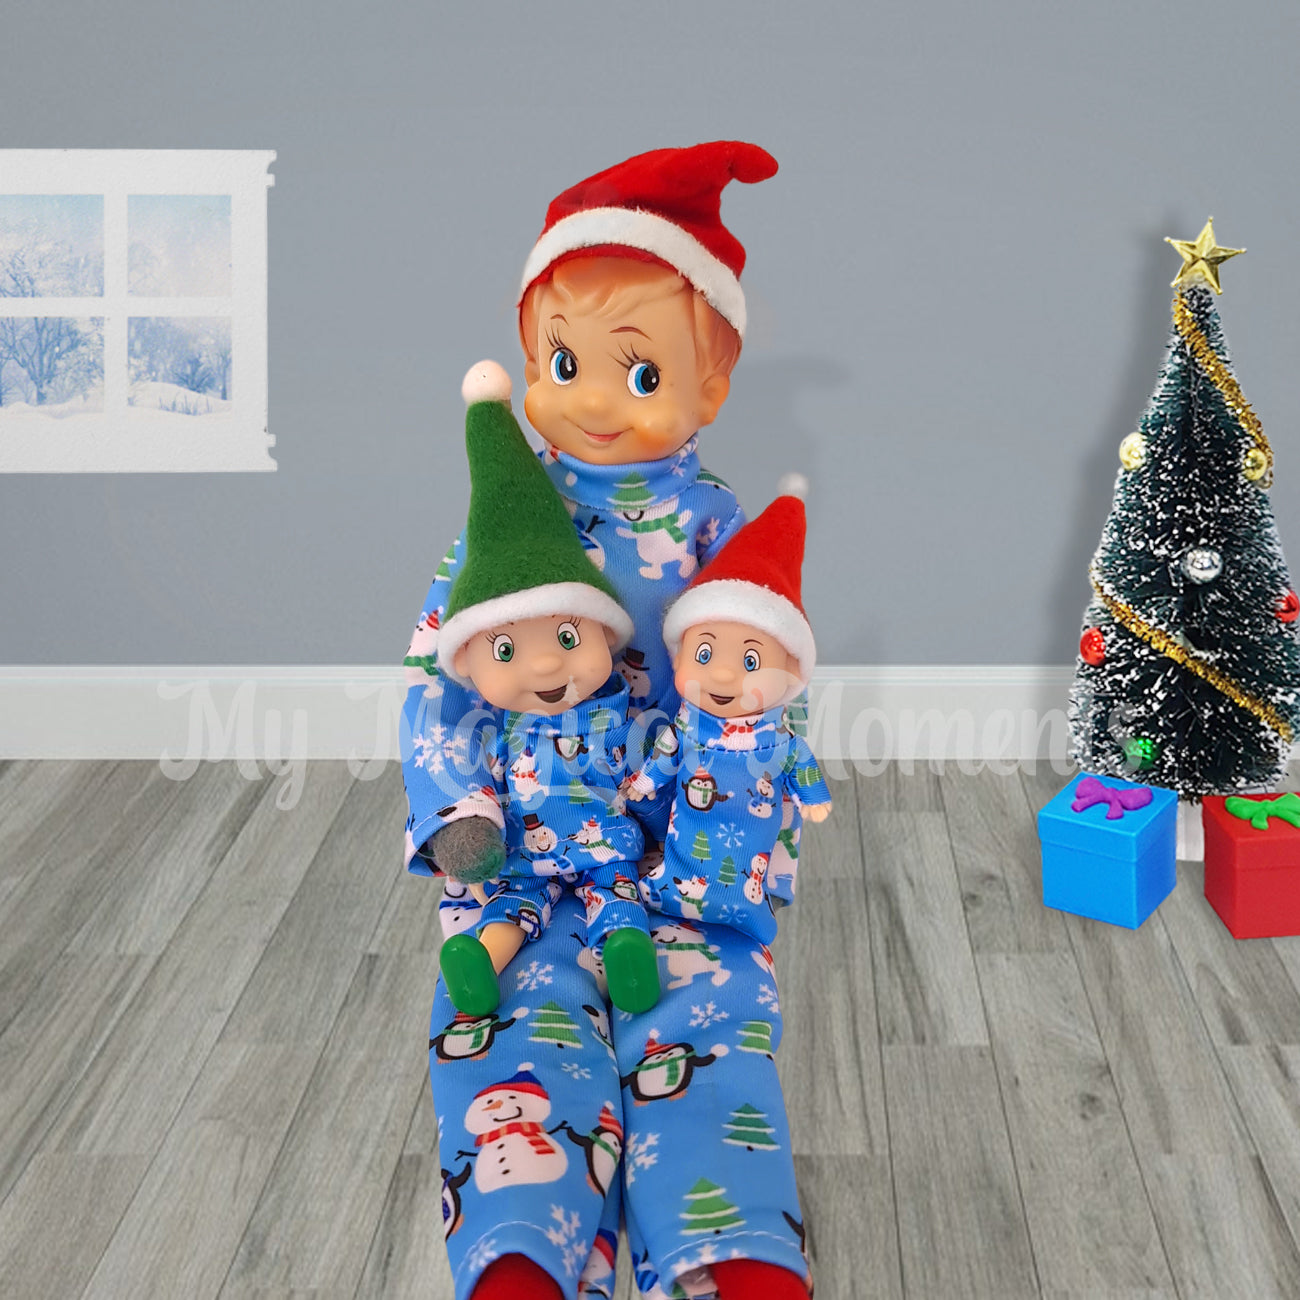 Matching pyjamas for adult elf, baby elf and toddler